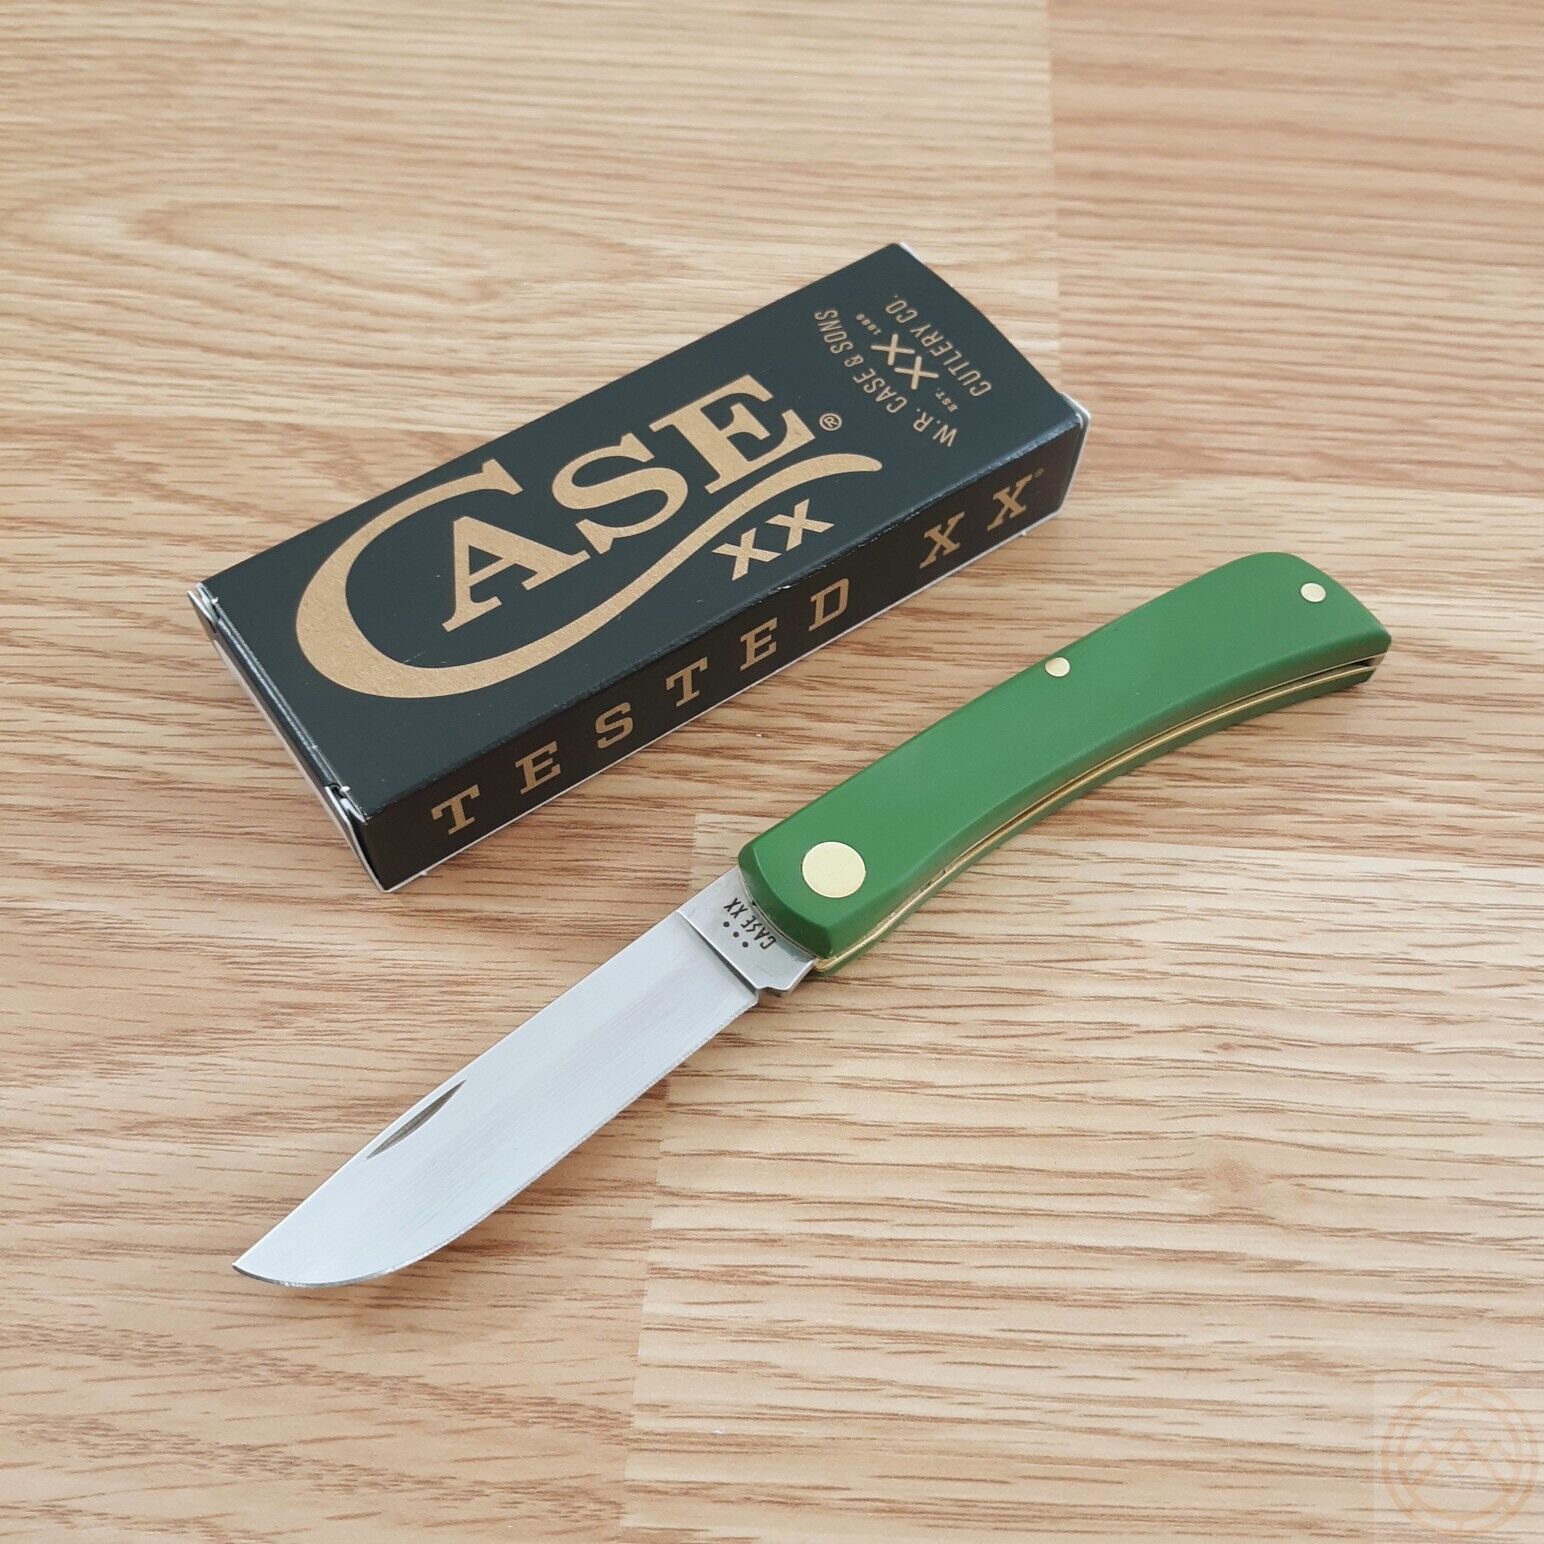 Case XX Sod Buster Jr Folding Knife Stainless Steel Skinner Blade And Synthetic